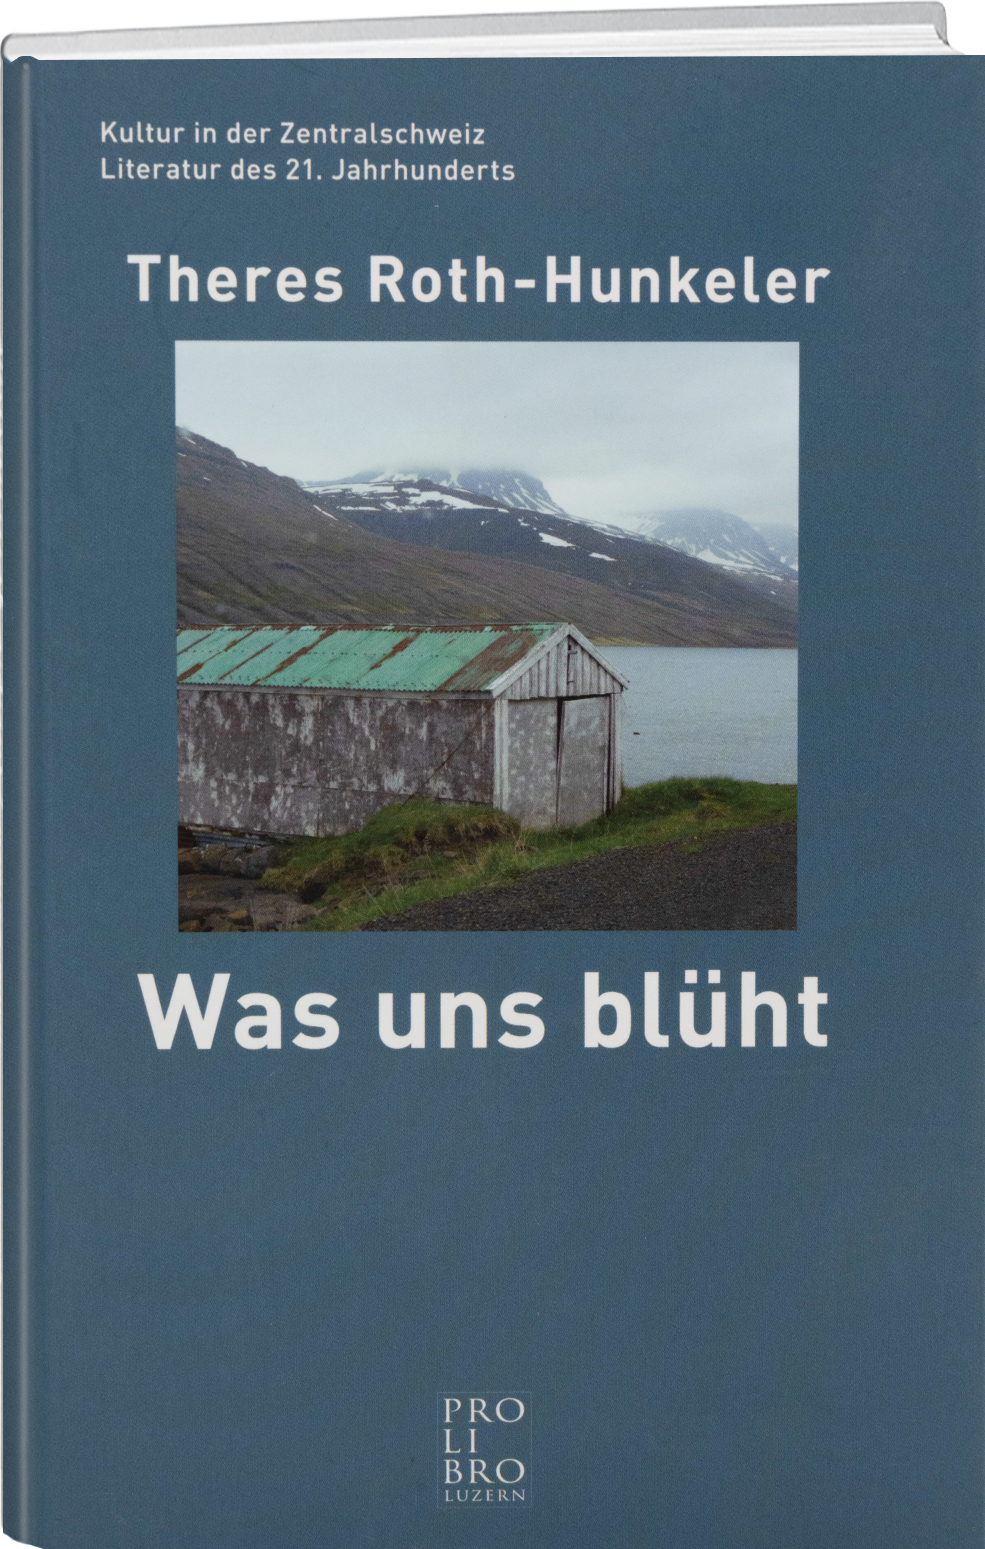 Theres Roth-Hunkeler: Was uns blüht - prolibro.ch